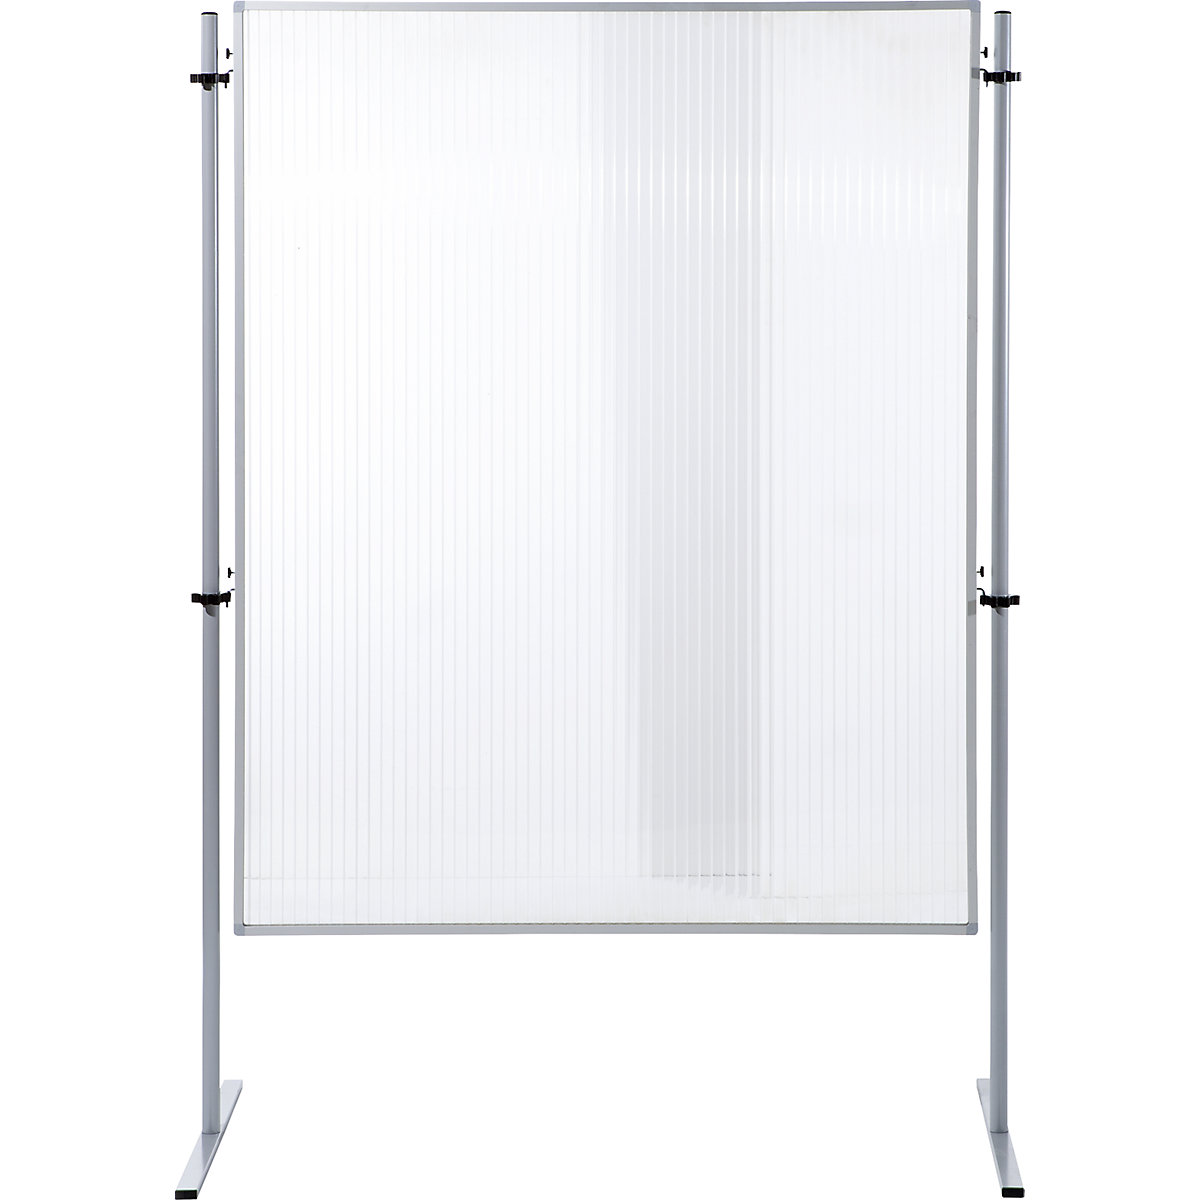 Functional partitions – eurokraft basic, polycarbonate glass panel, HxW 1500 x 1200 mm, pack of 1-11